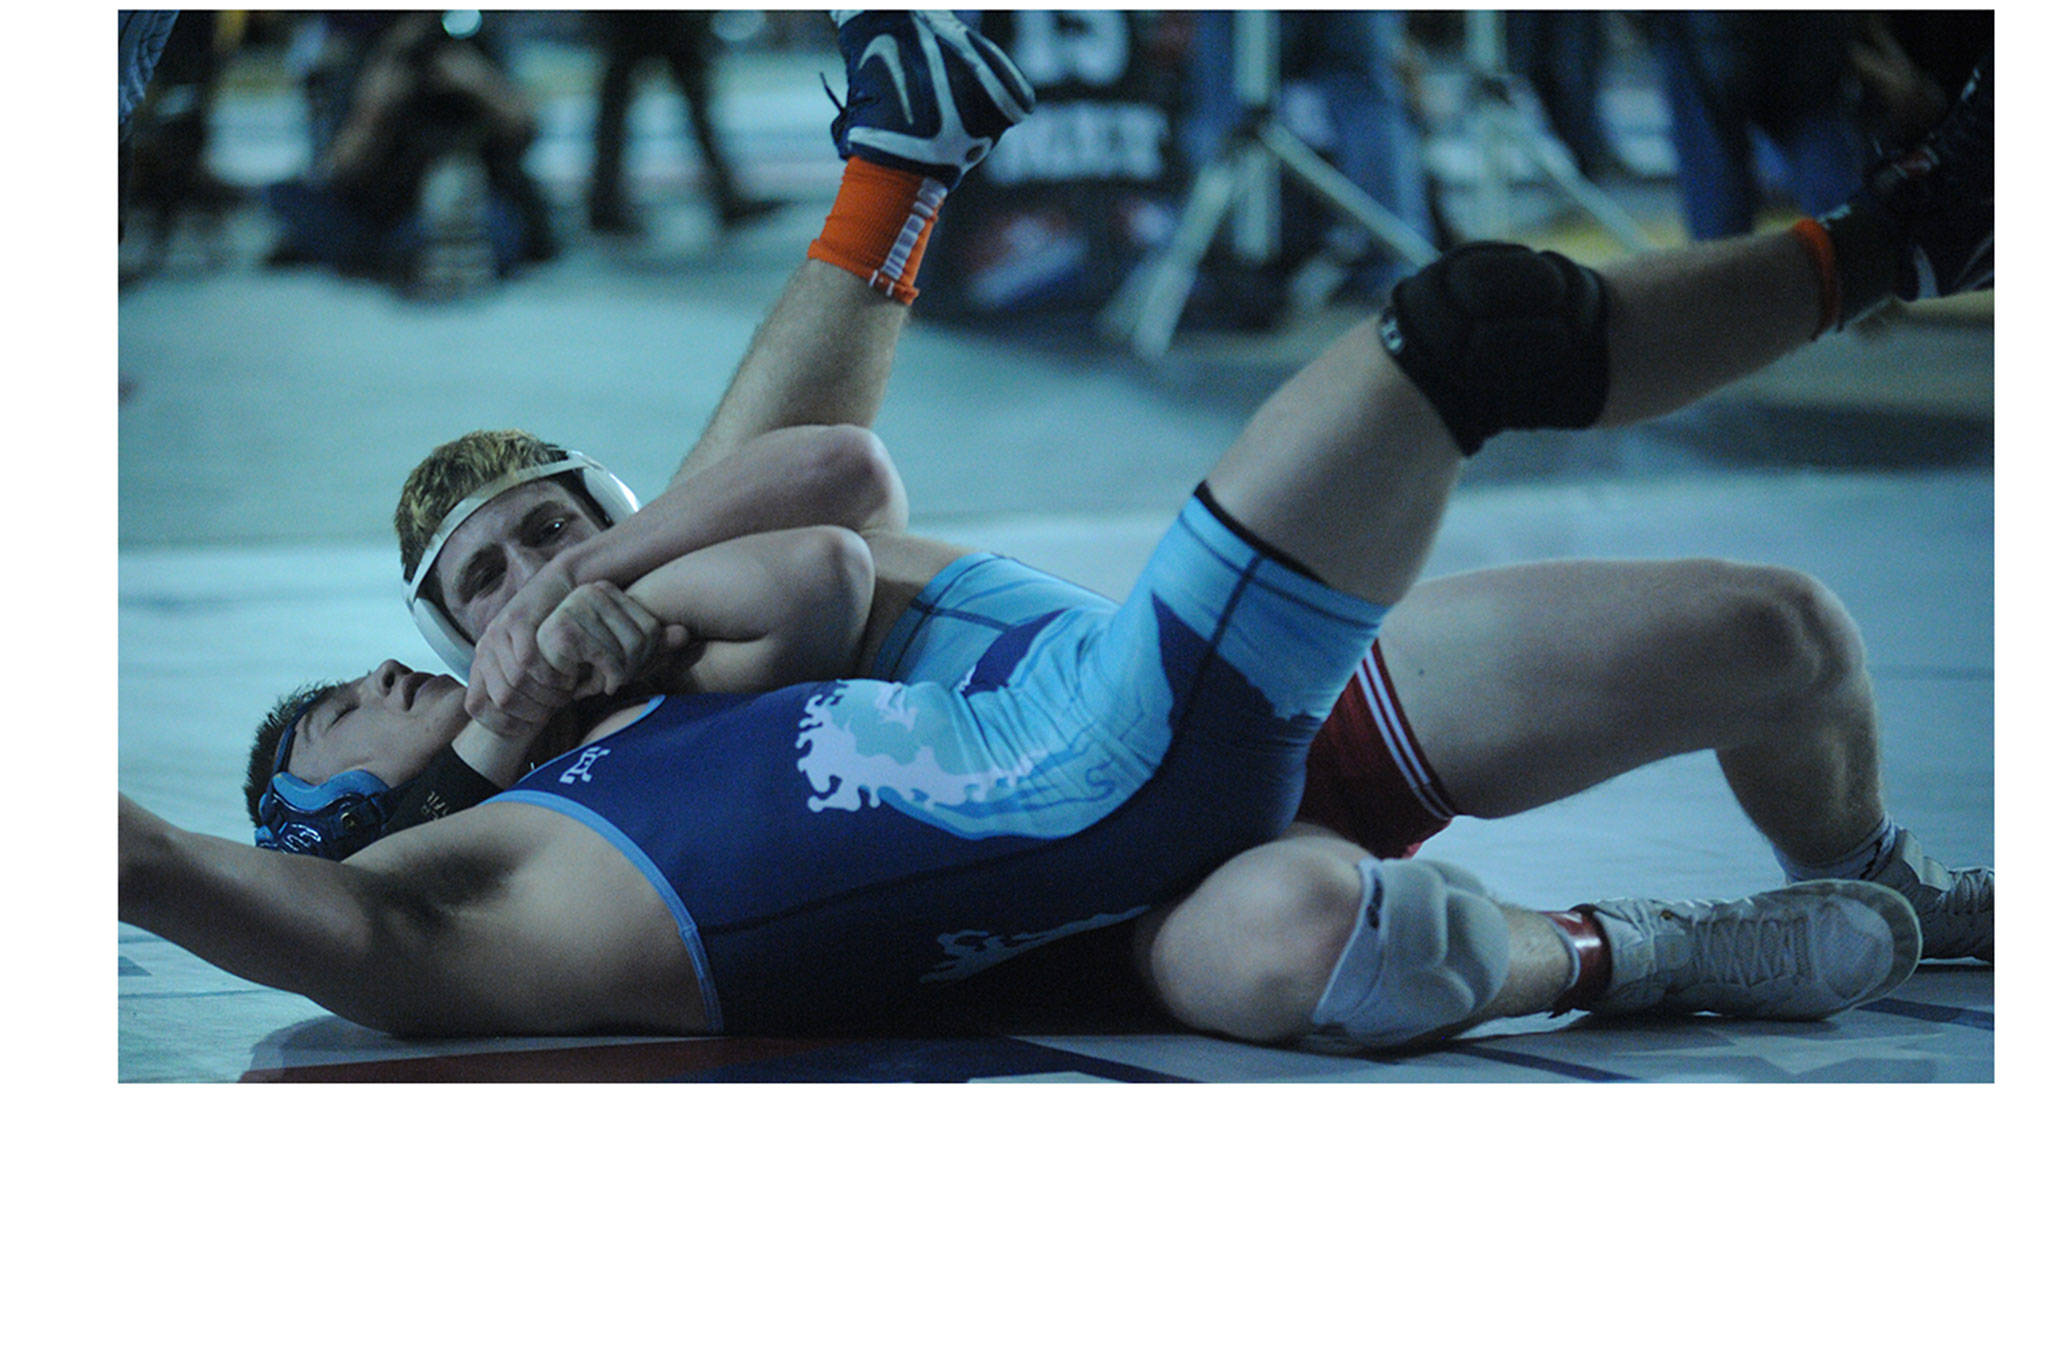 9 local wrestlers place at state